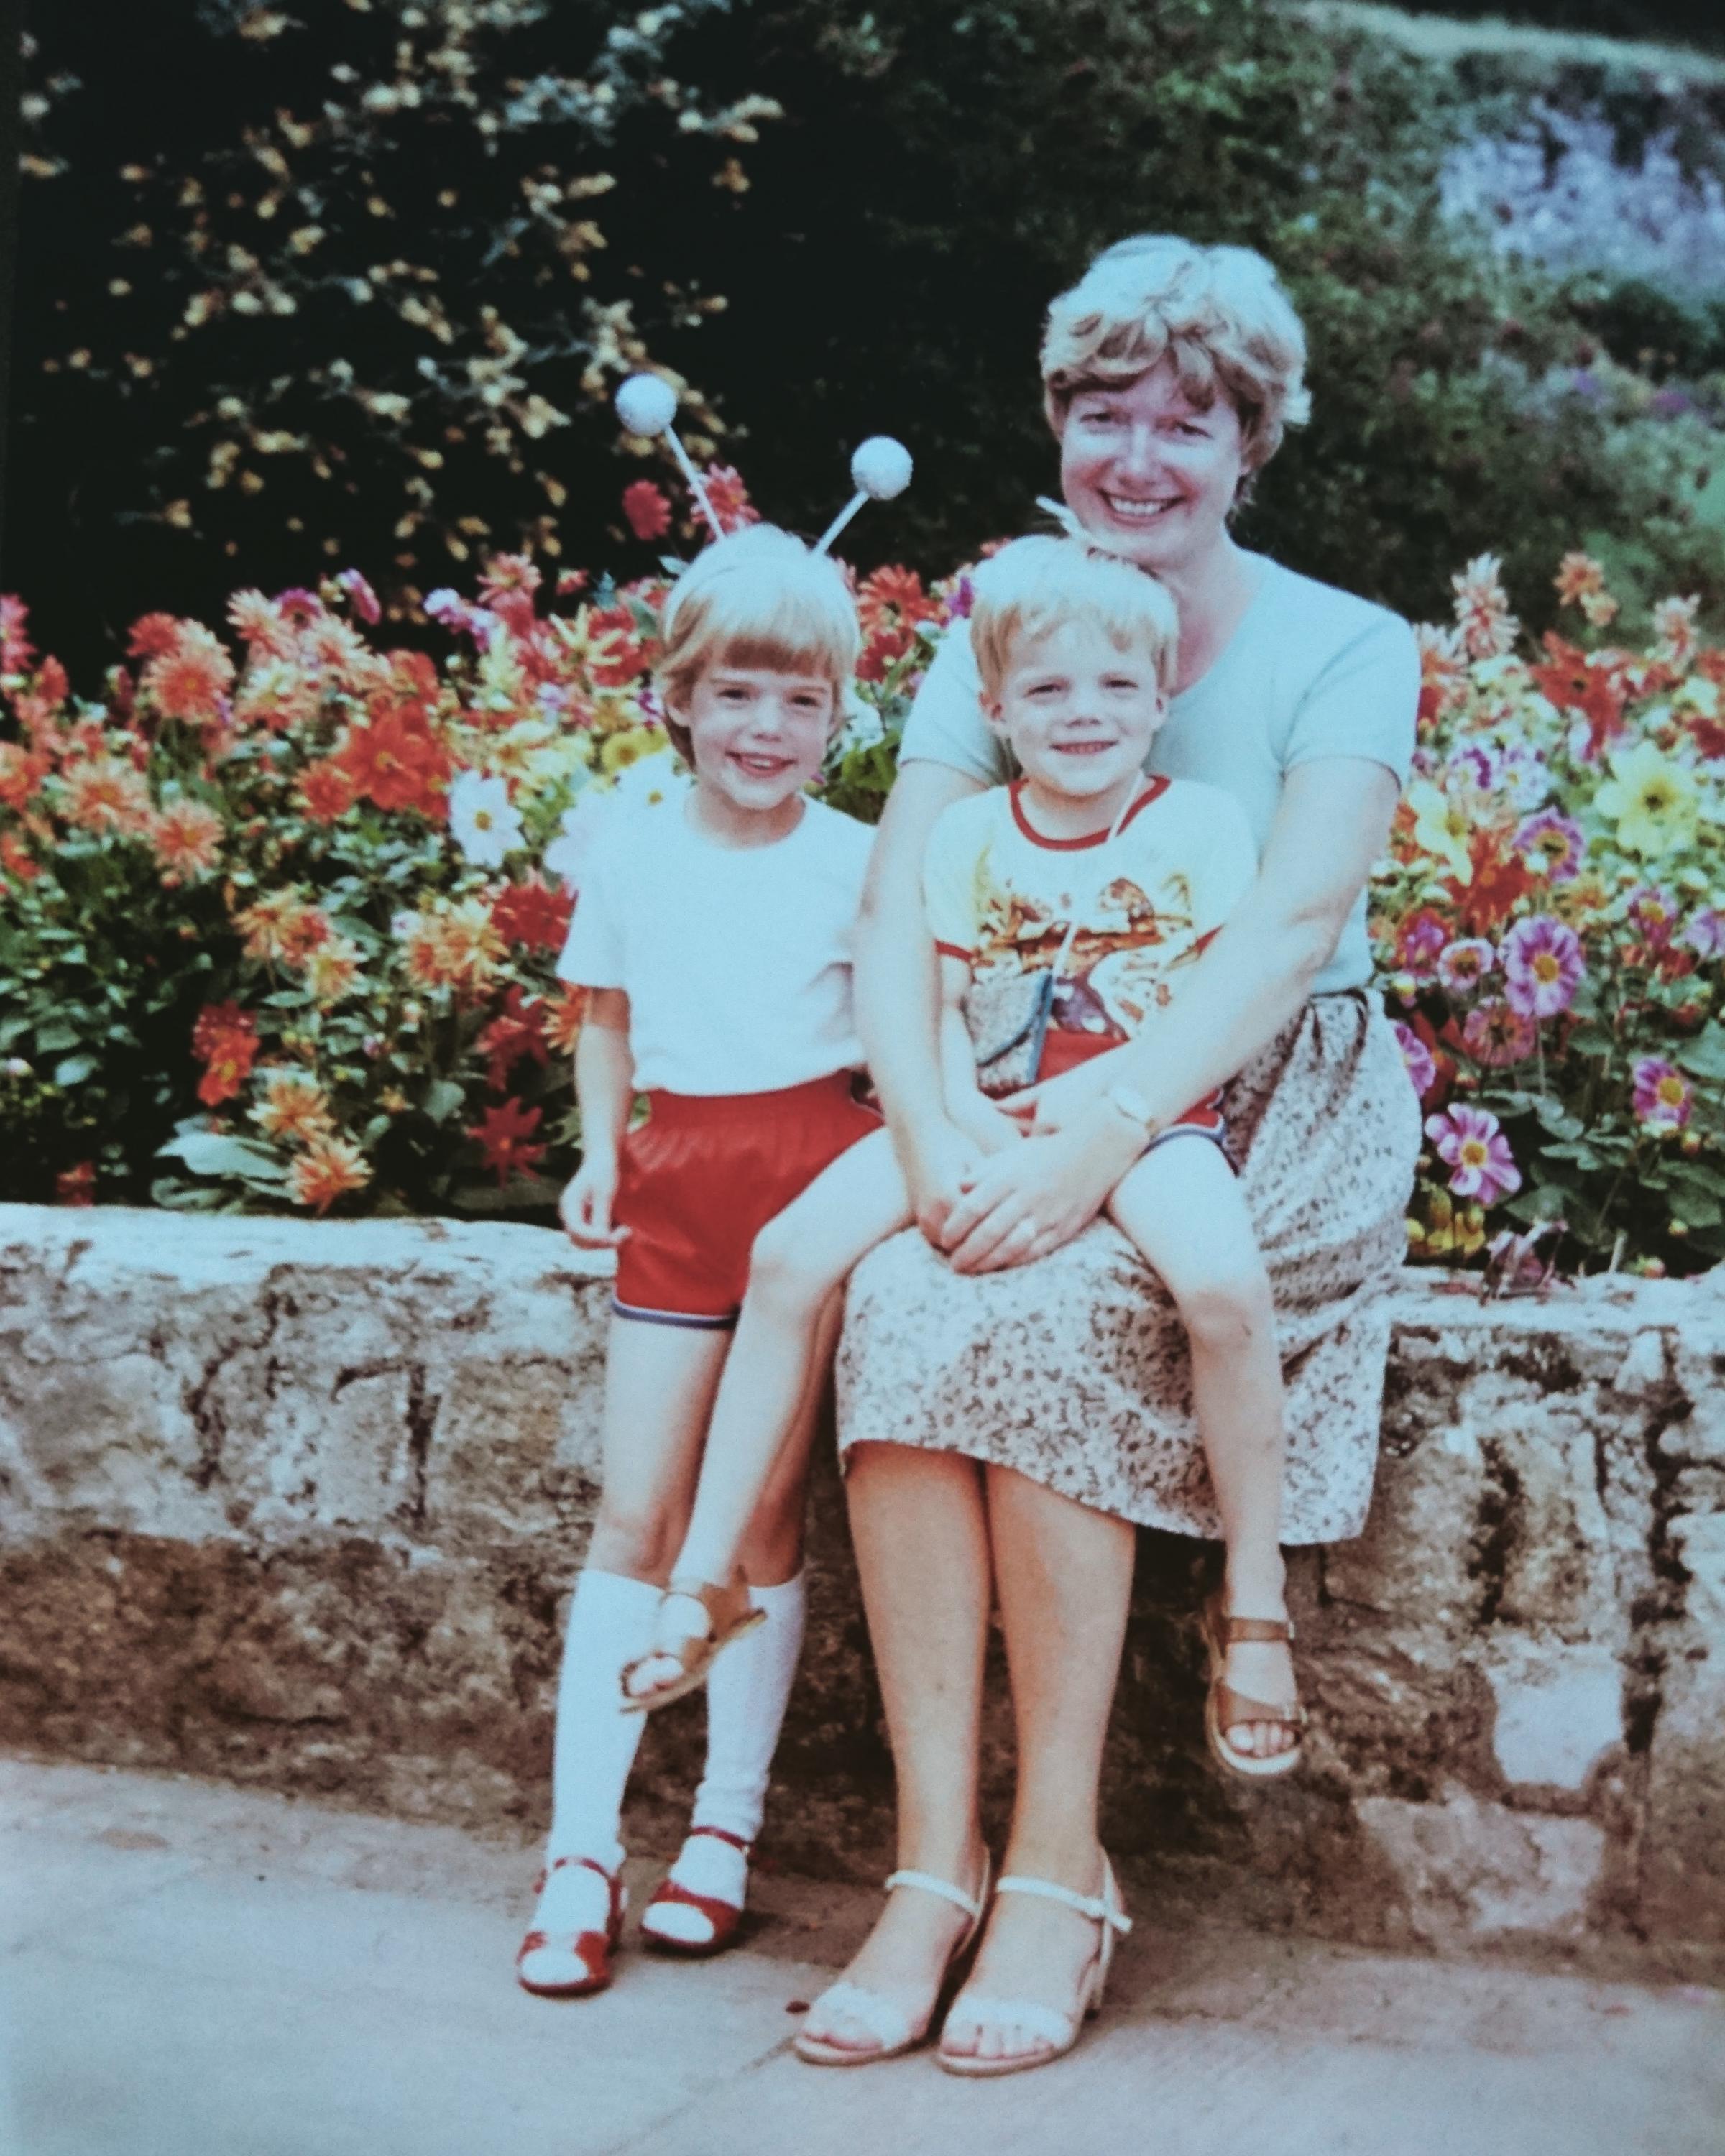 Sam and Andrew Self as kids with their mum, Jacque Self